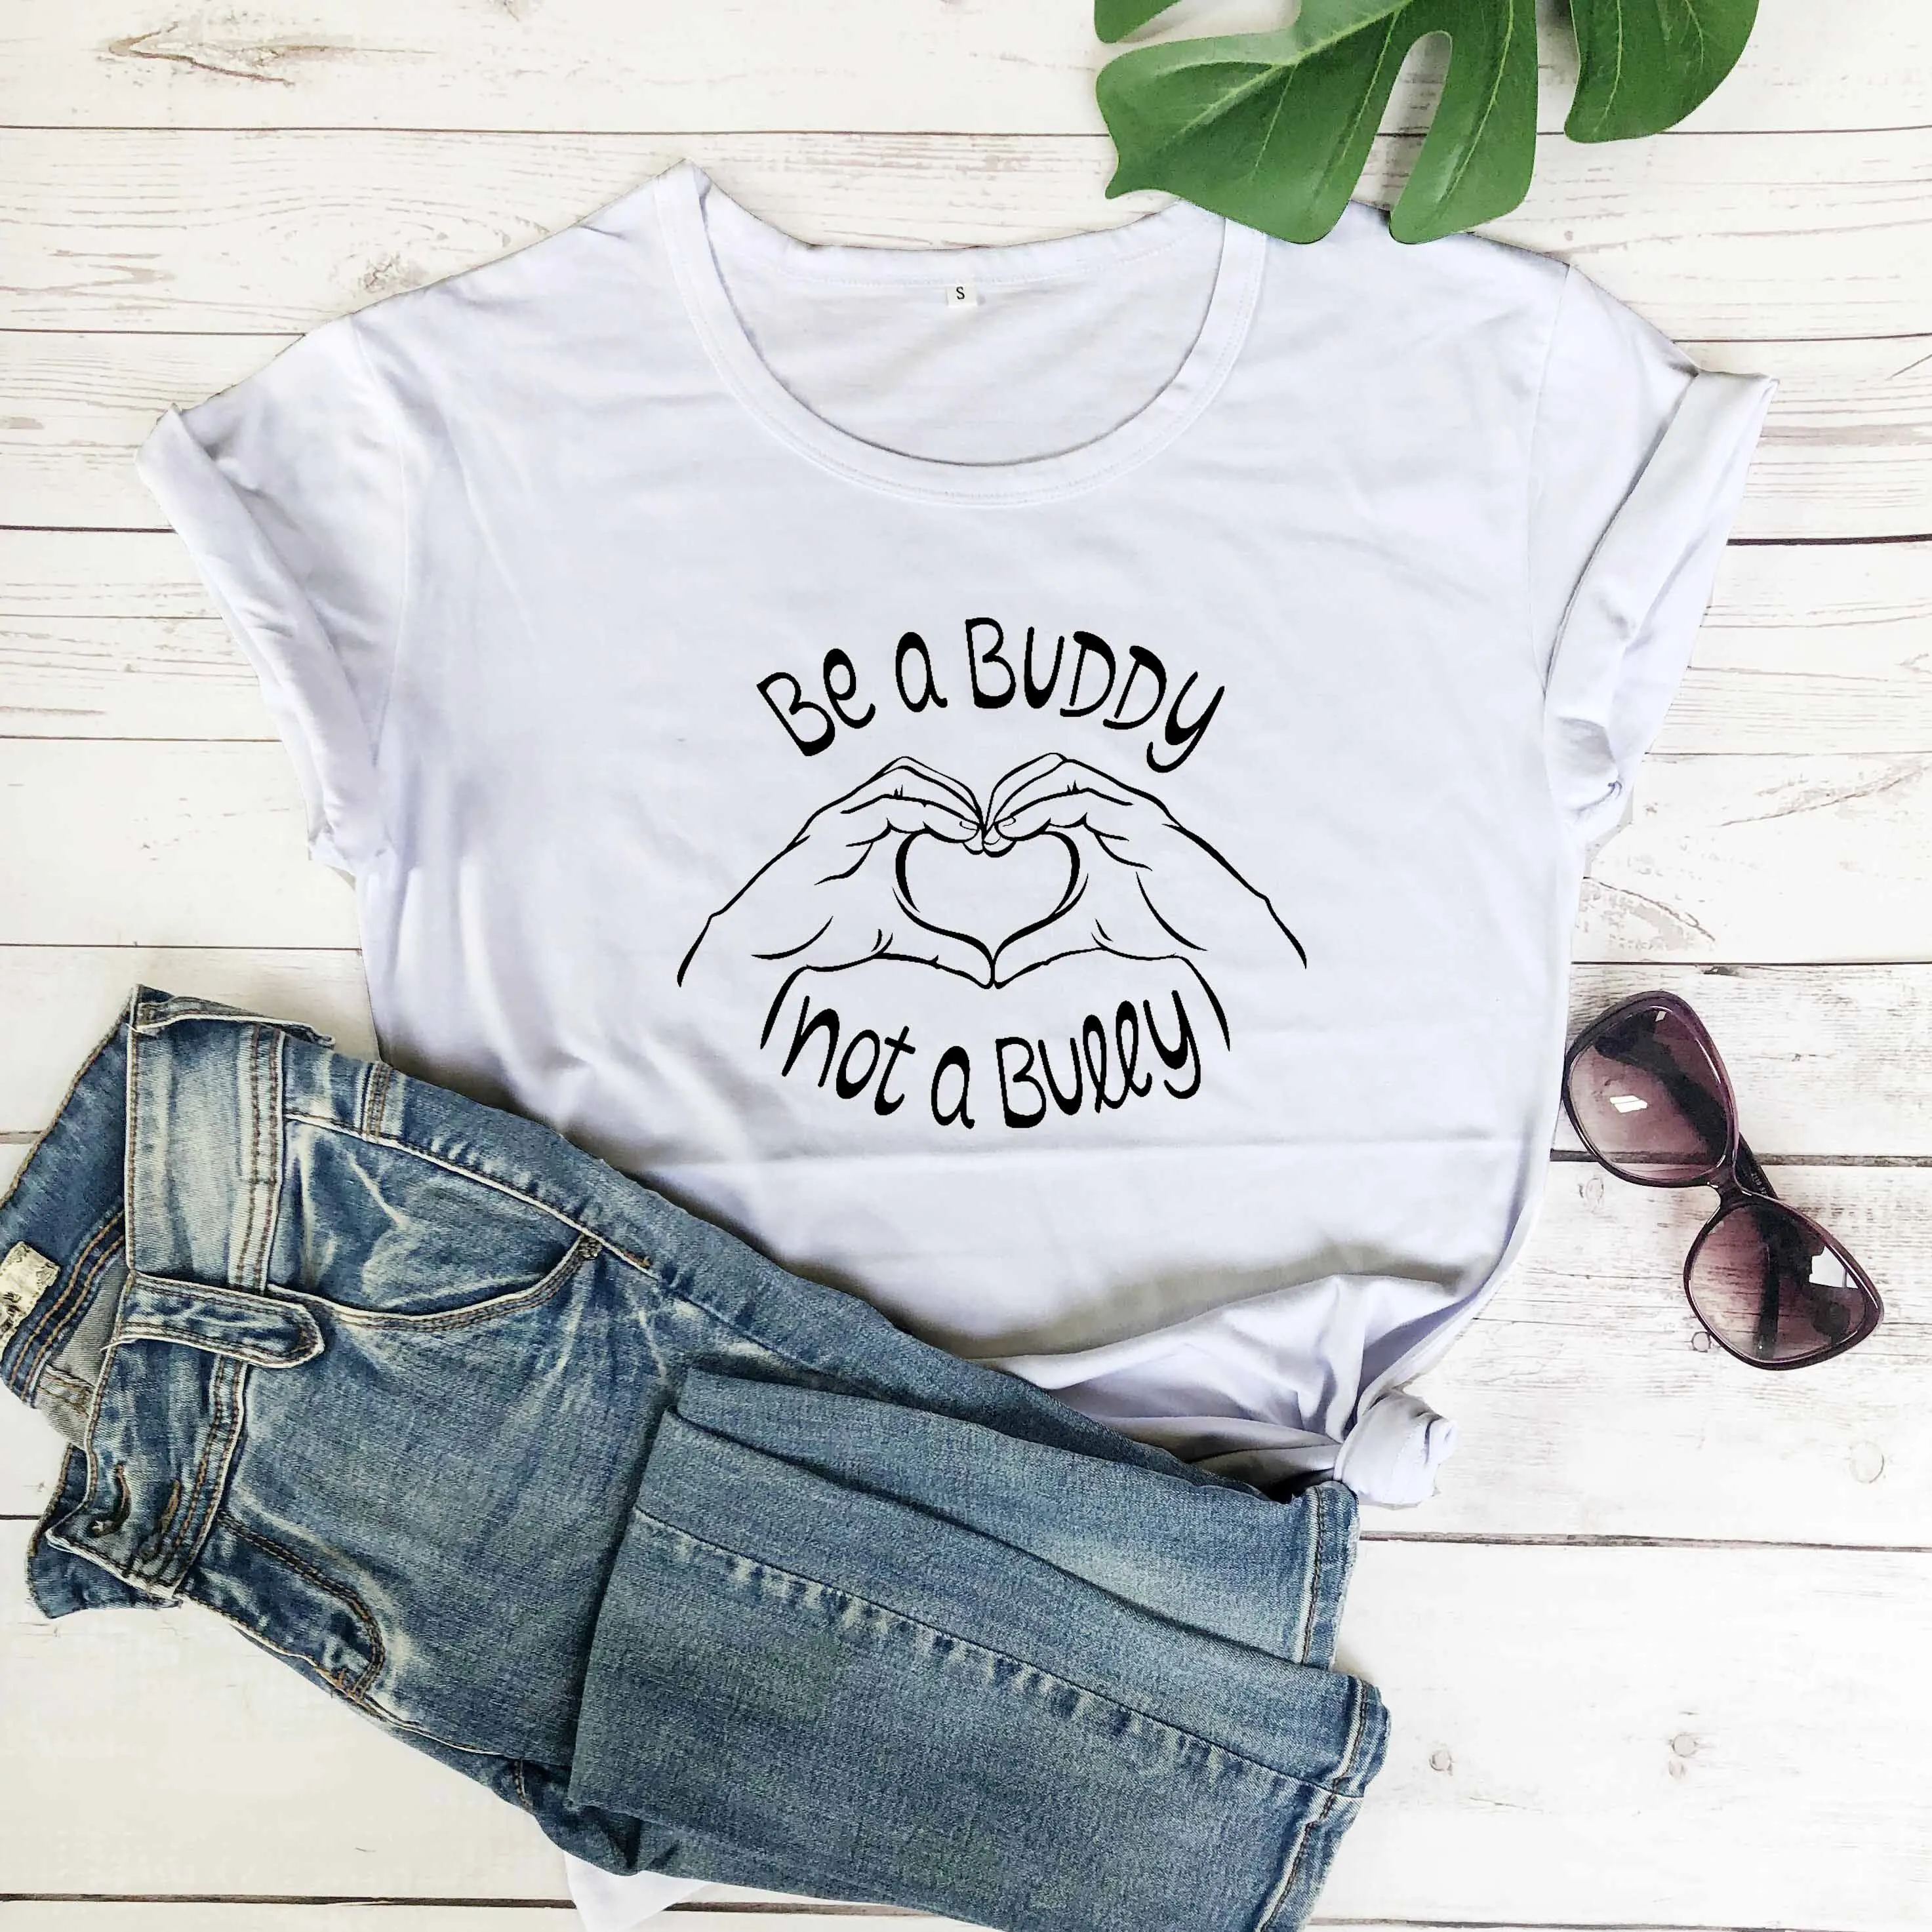 

Be A Buddy Not A Bully Inspirational t shirt fashion heart graphic funny grunge tumblr tees vintage cute kawaii young tops m036